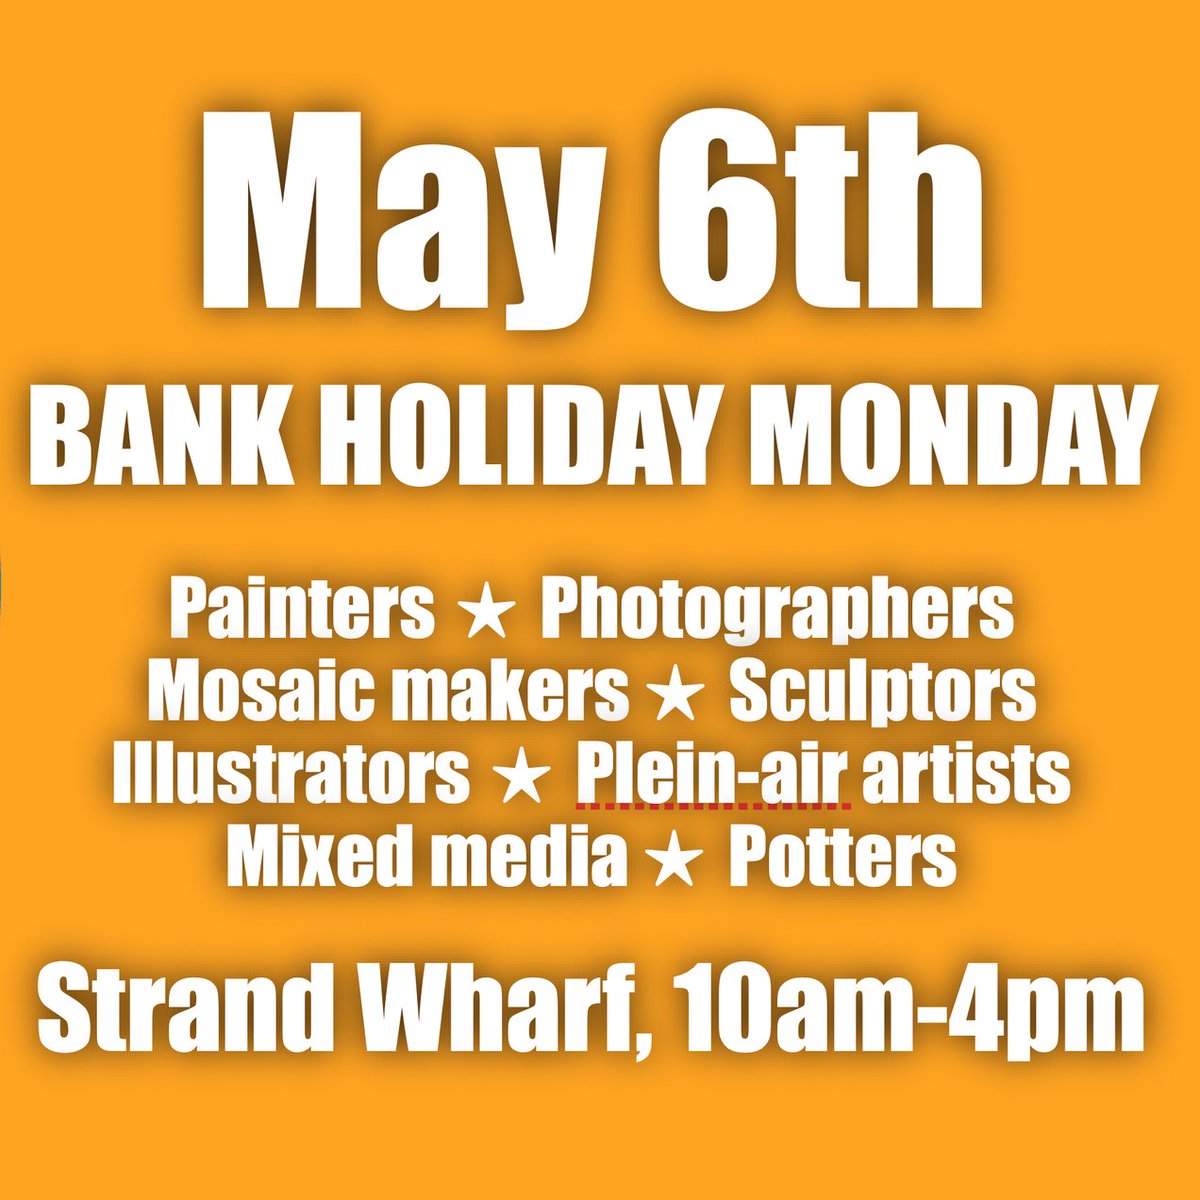 COMING VERY SOON 🛍️🖌️ Old Leigh Artists' Market returns this bank holiday Monday! Enjoy the best in local painting, printing, sculpture, mosaic, pottery, photography and so much more! ✨ 25 stall holders 📅 Monday 6 May 🕒 10am - 4pm 🔗 visitsouthend.co.uk/old-leigh-arti…